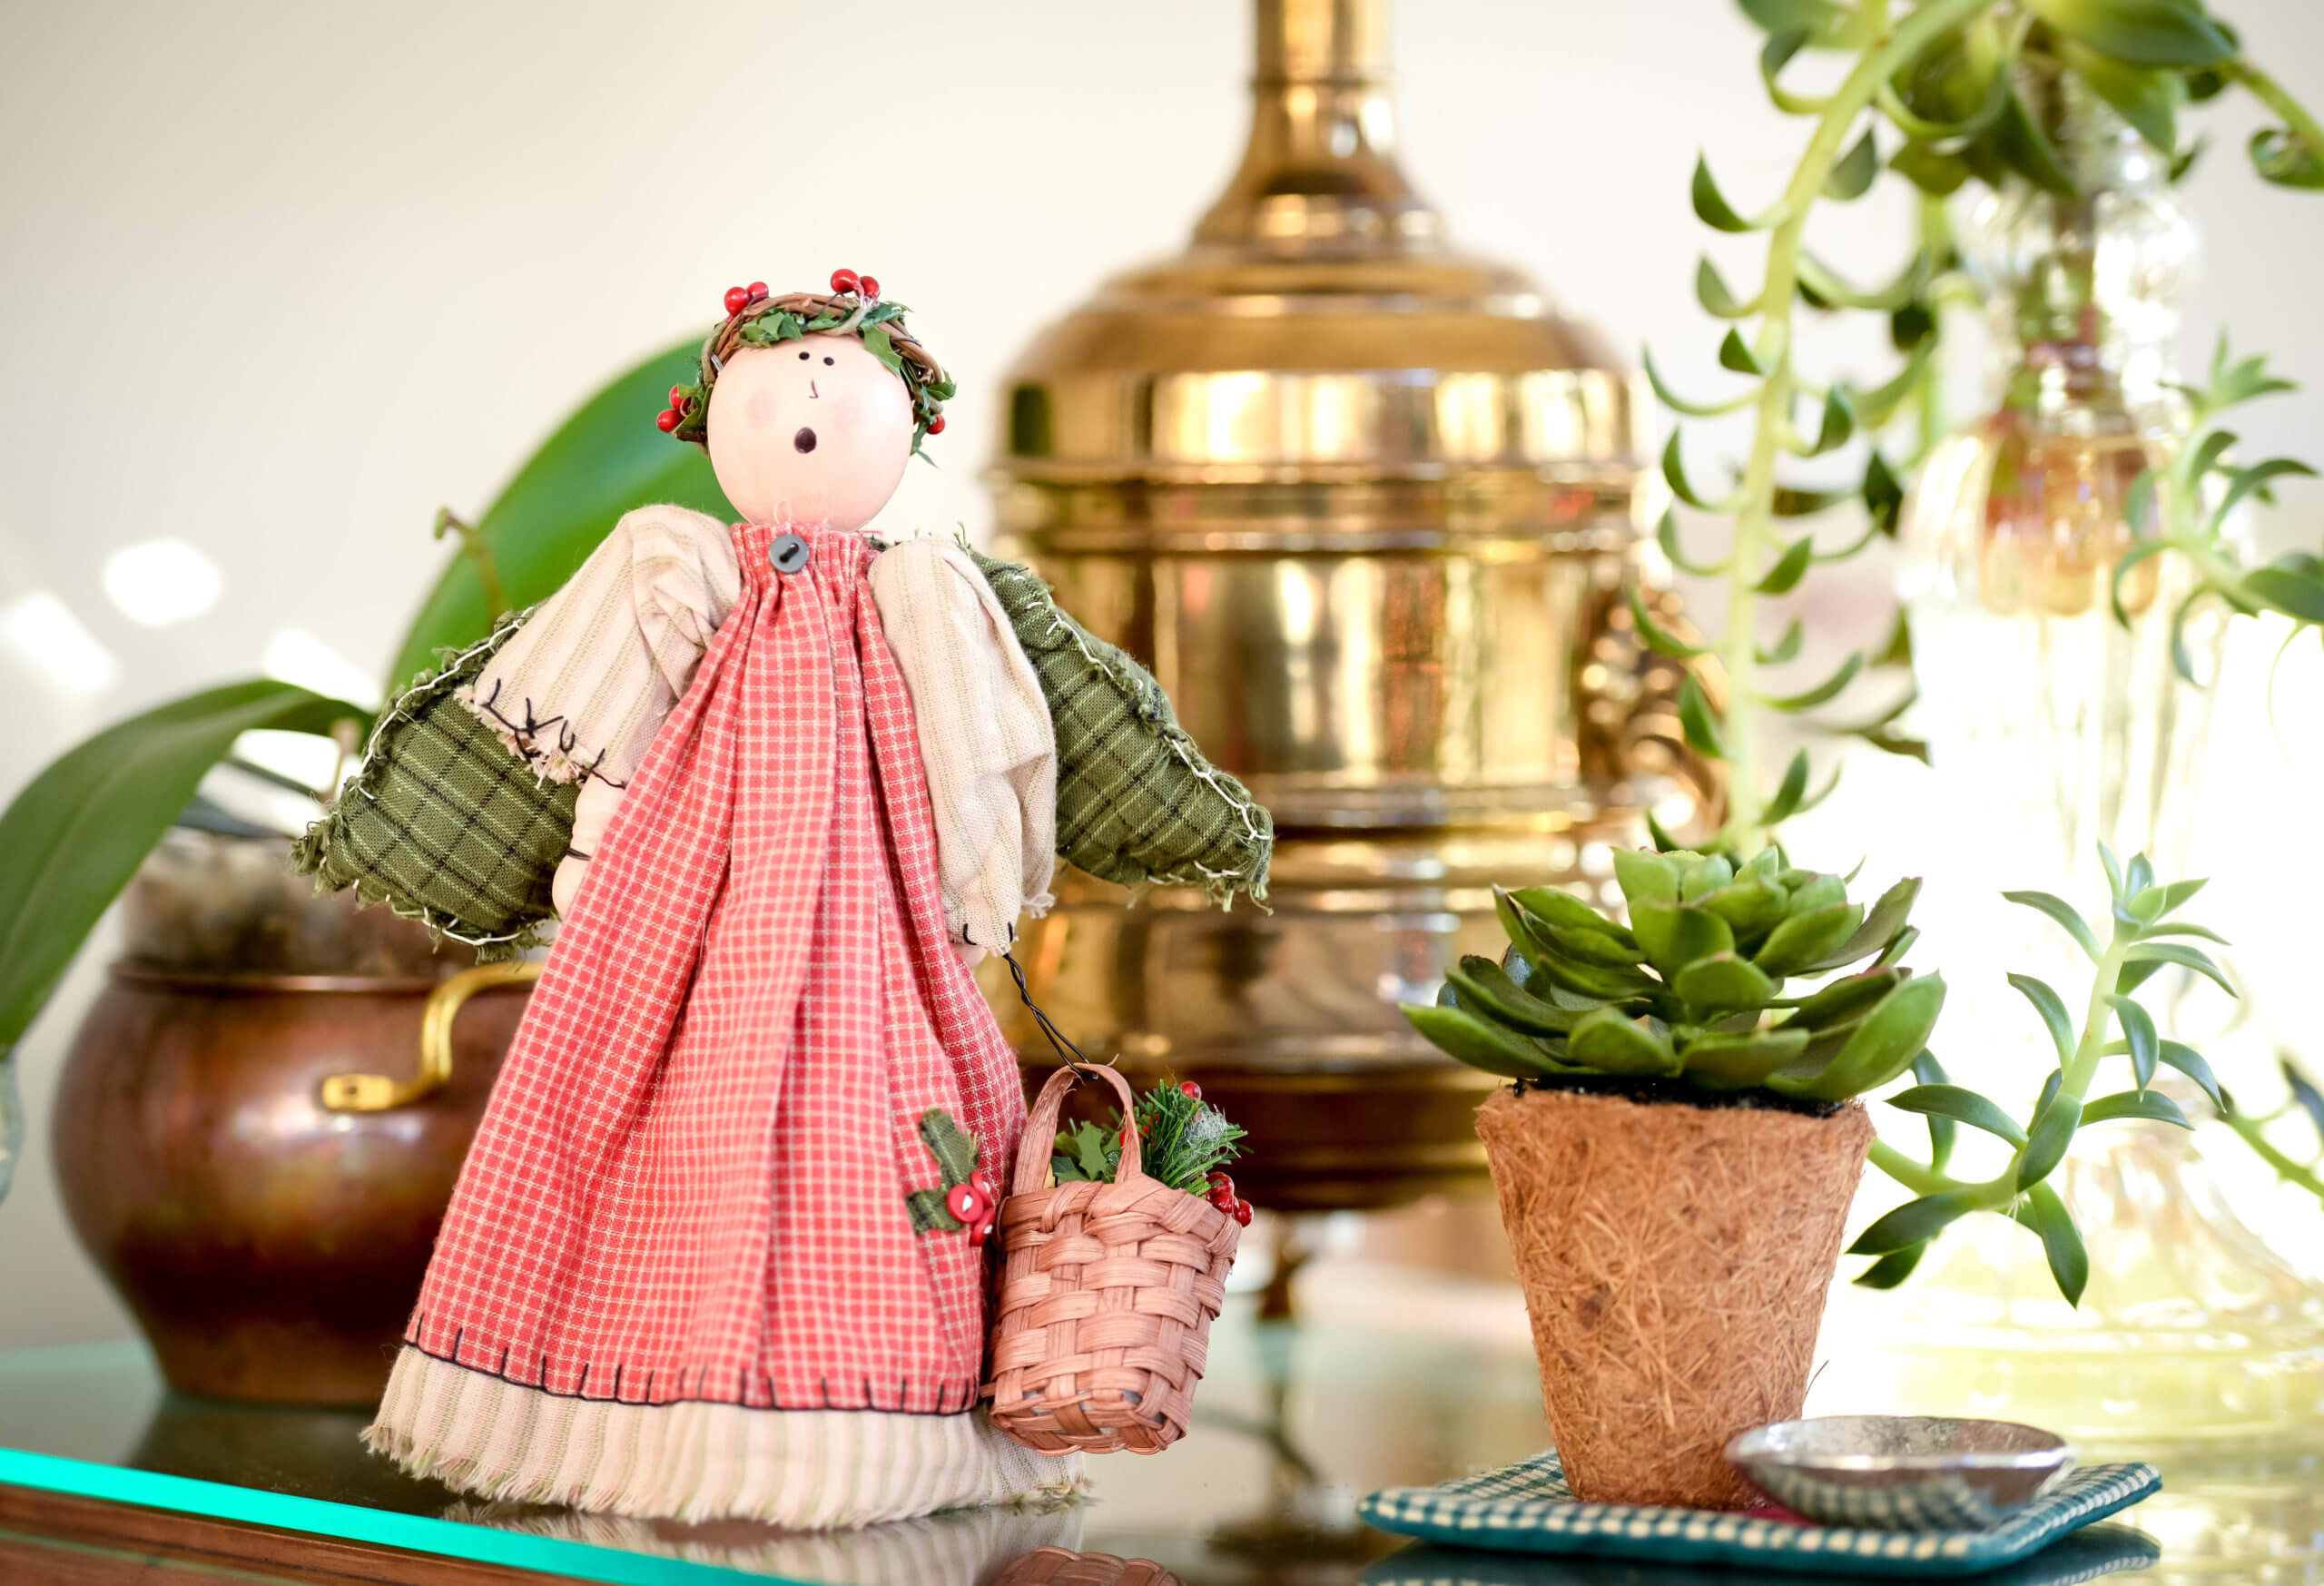 A singing Christmas angel ornament stands on a table surrounded by several plants.